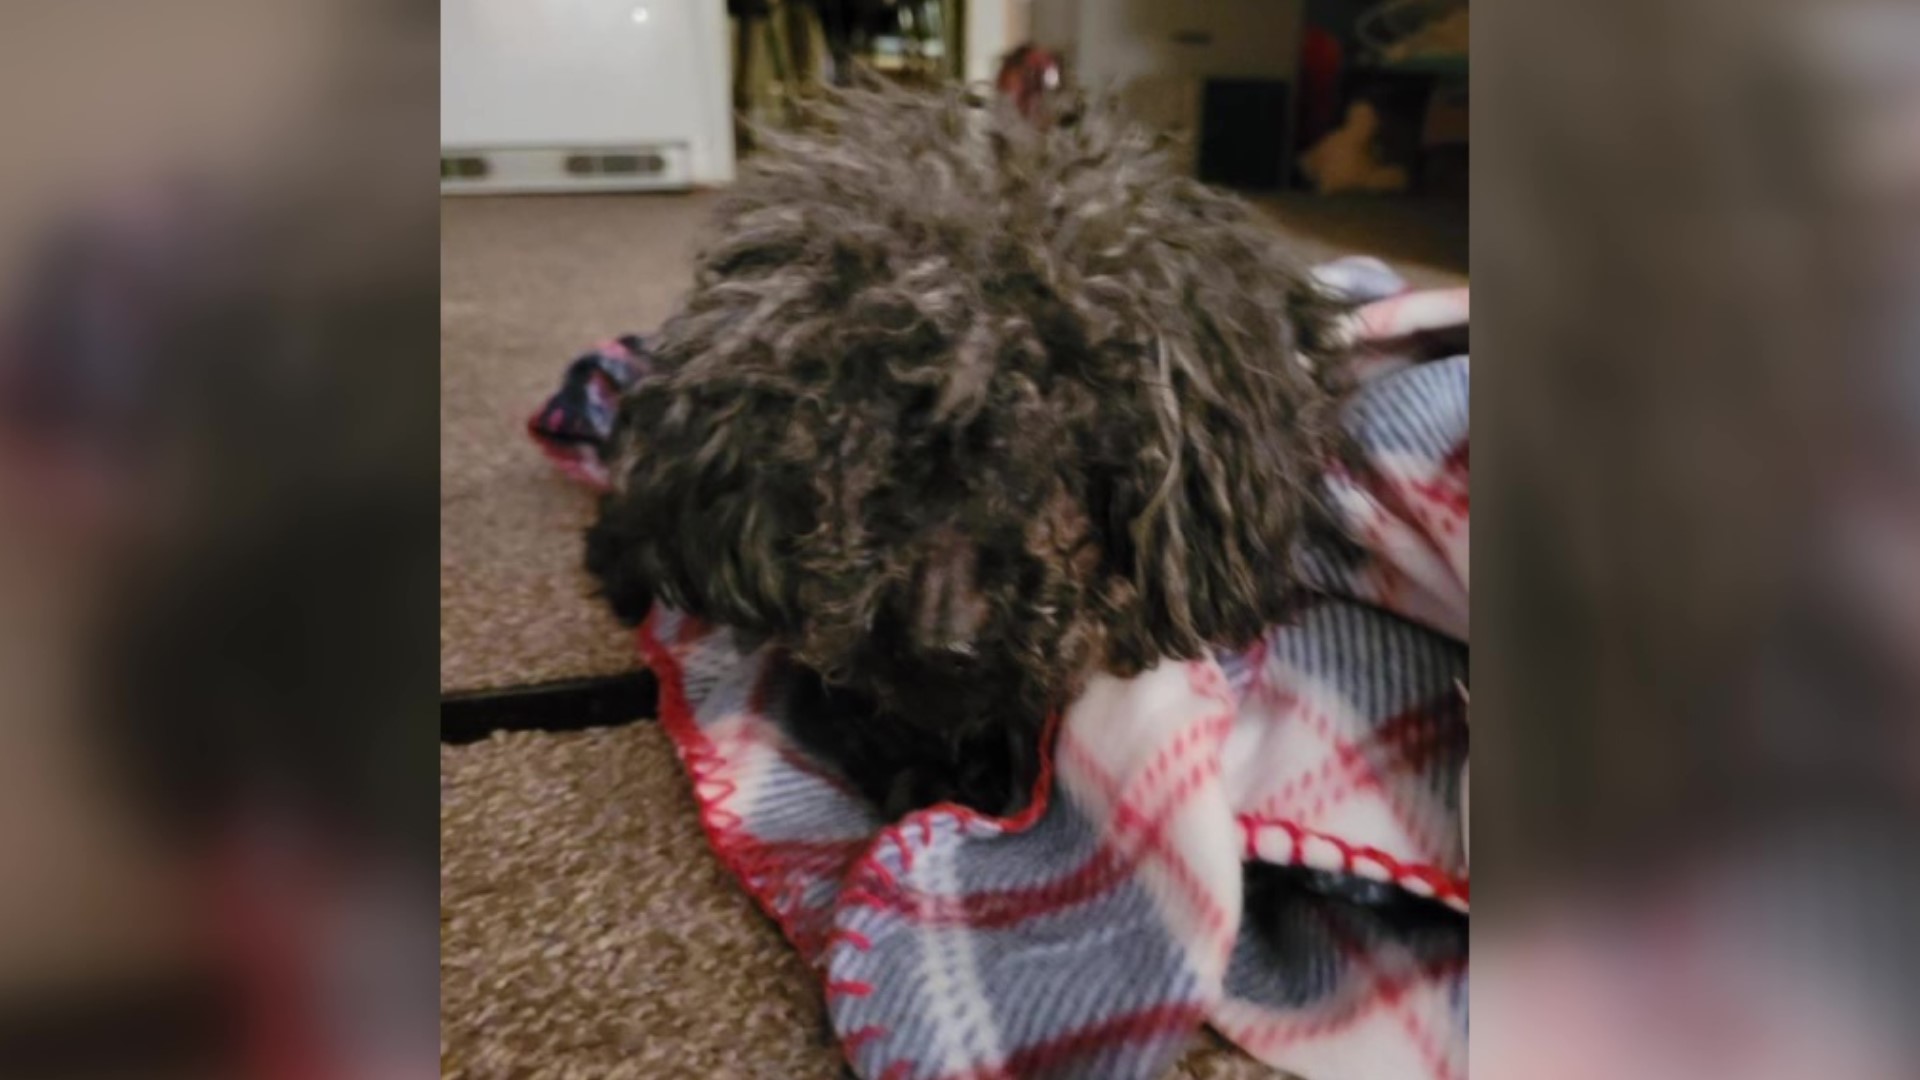 Humane officers are trying to figure out who left a 12-year-old dog outside a Dollar General Wednesday night. The poodle mix was treated for hypothermia.